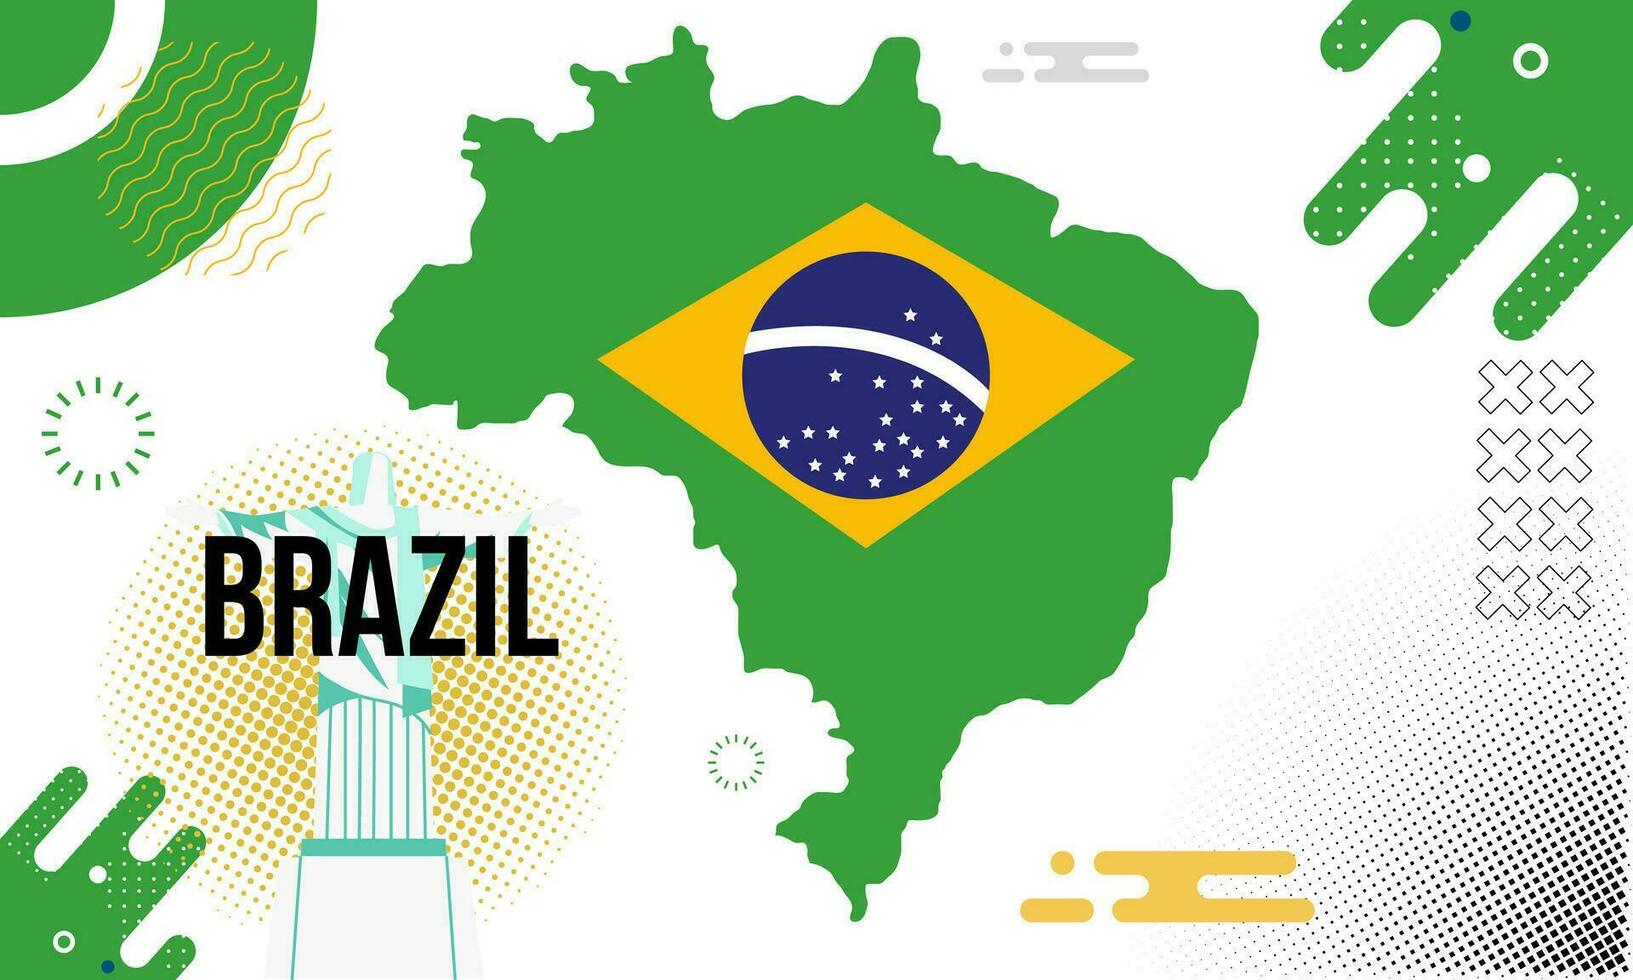 Brazil national day banner with maps and typography illustration vector